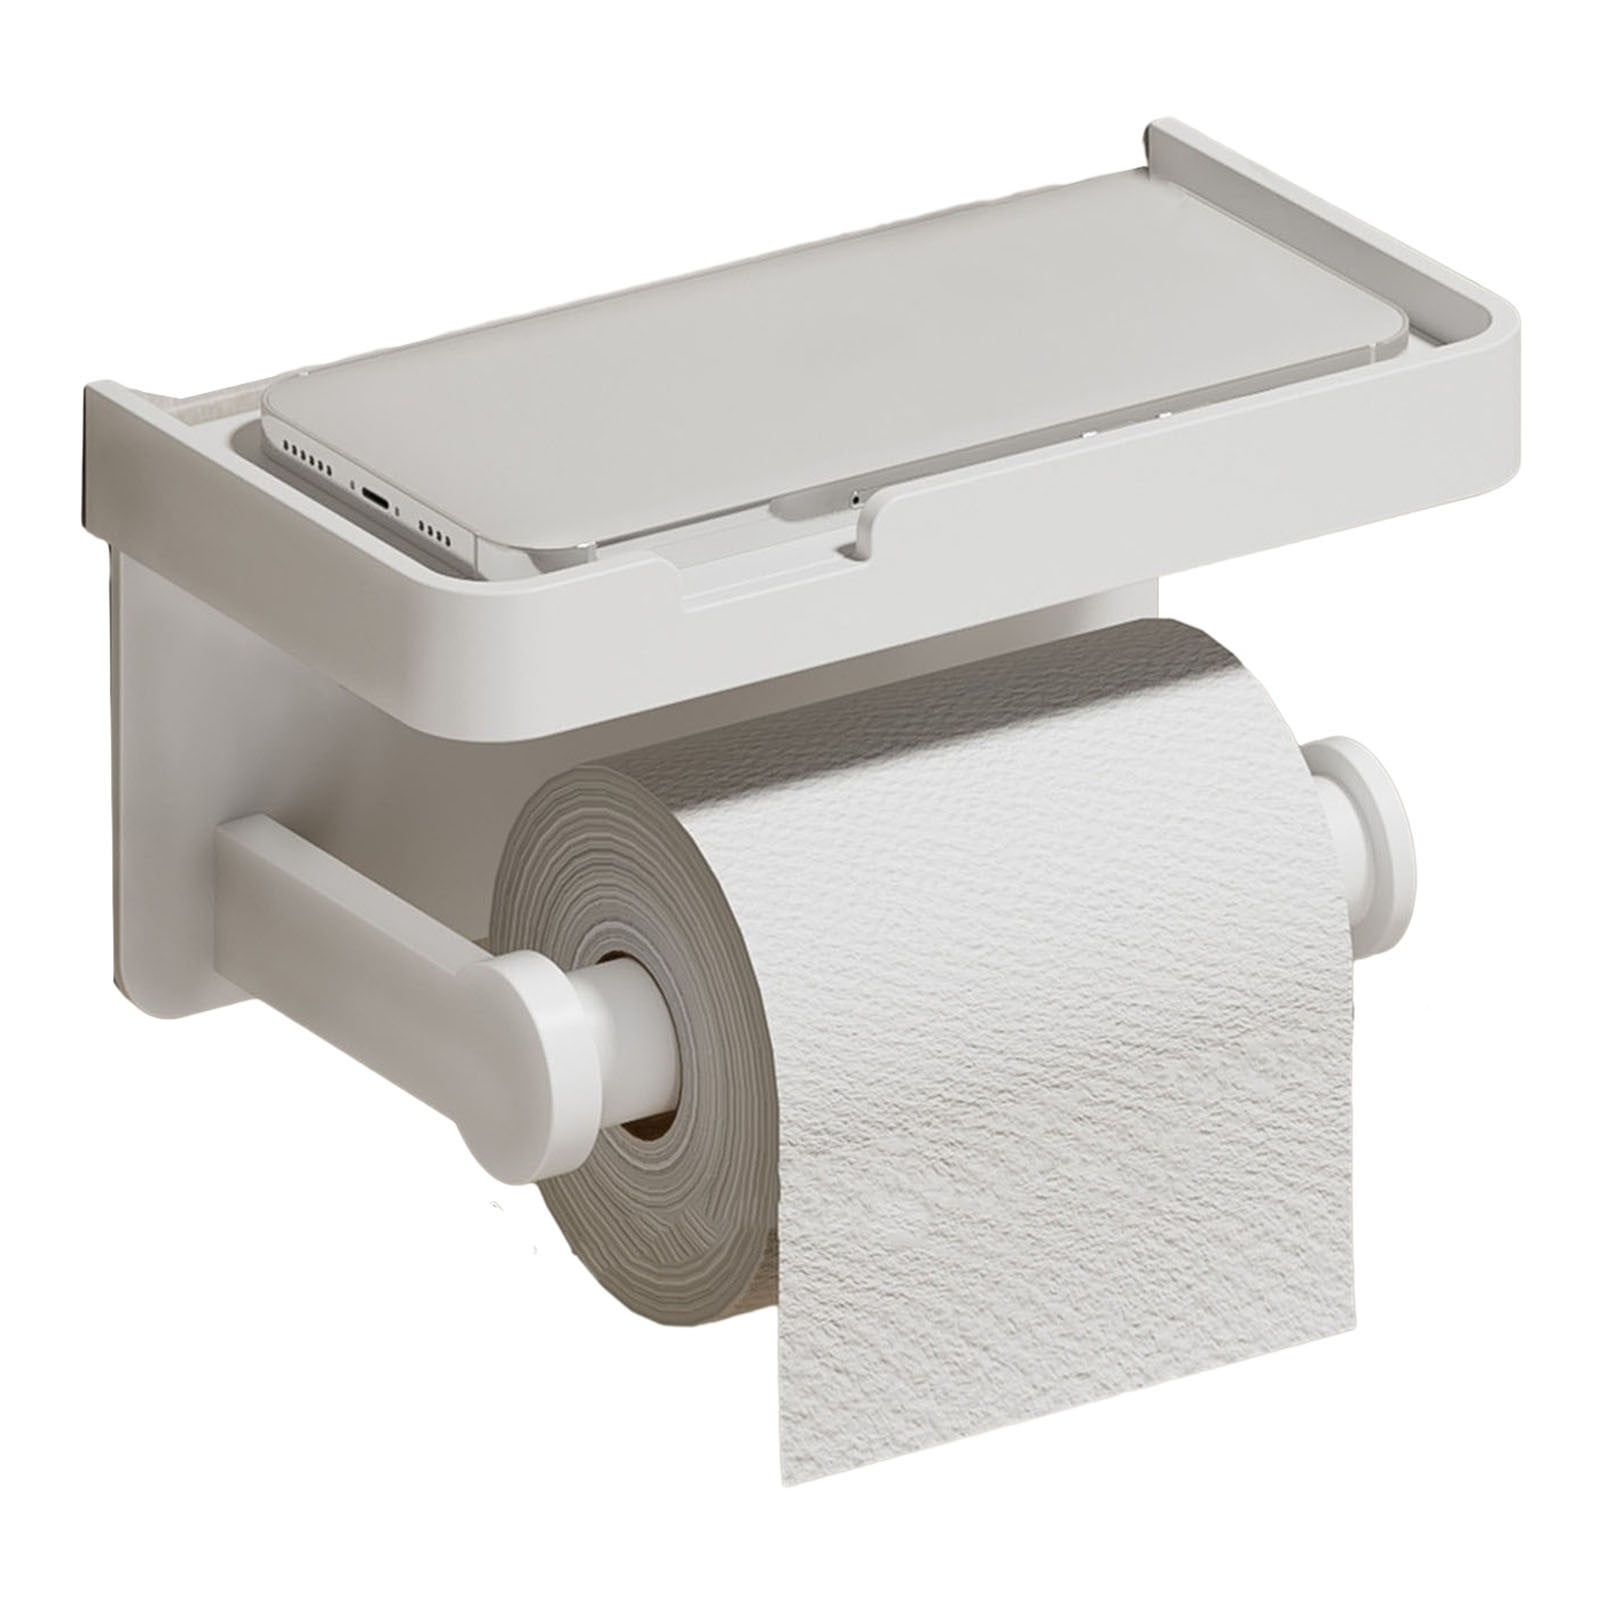 Wall Mounted Toilet Paper Holder with Phone Shelf, Space Aluminum